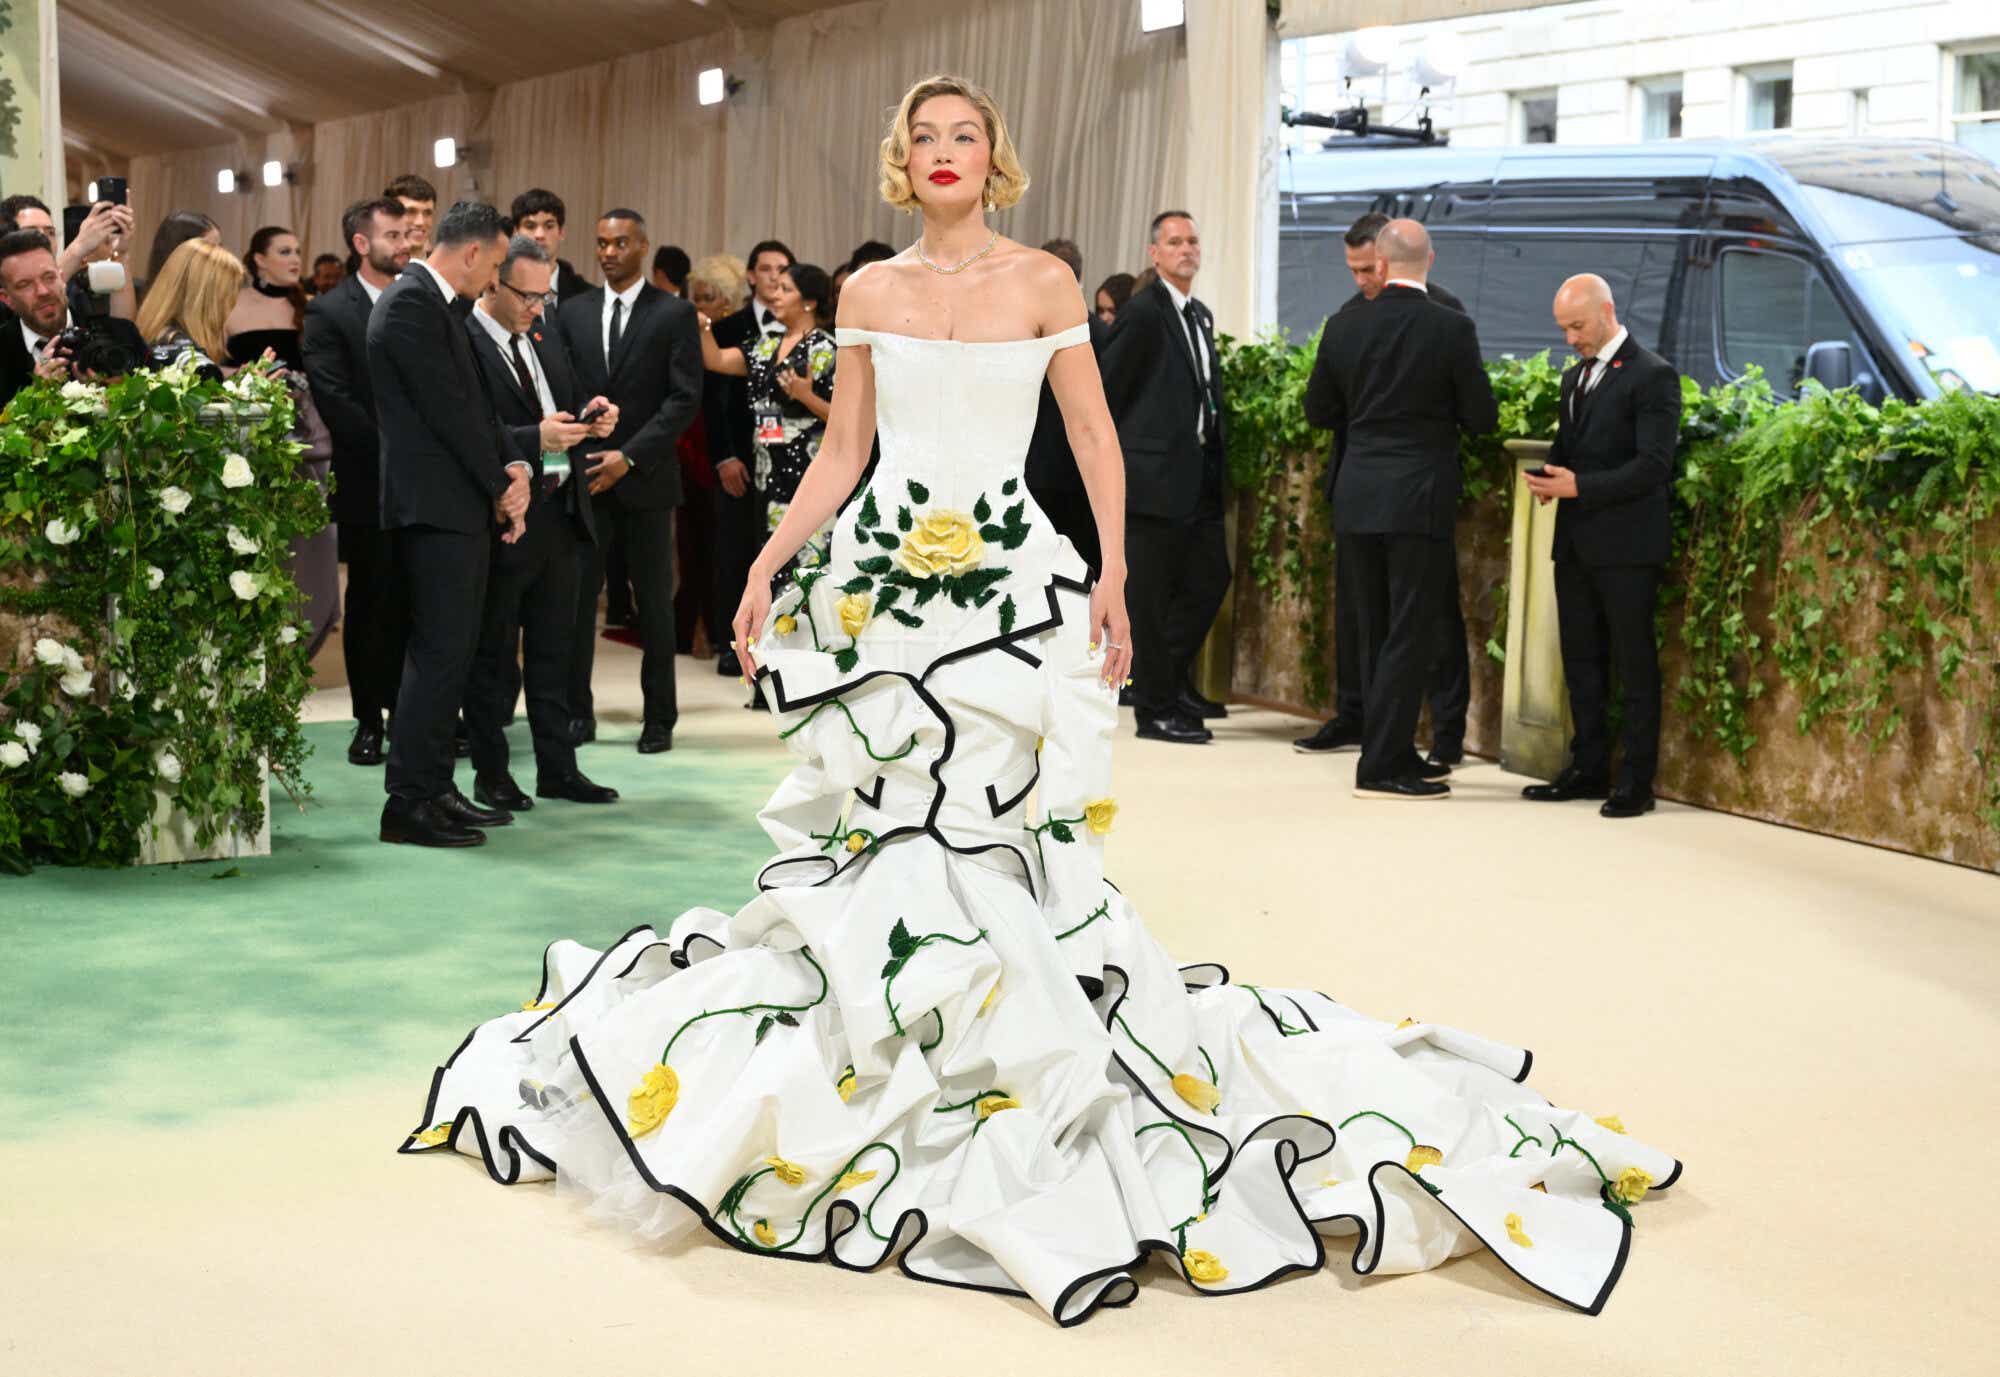 Gigi Hadid wears a bold red lip and her hair in pin curls, plus a white off-the-shoulder gown with yellow flowers and black trim.